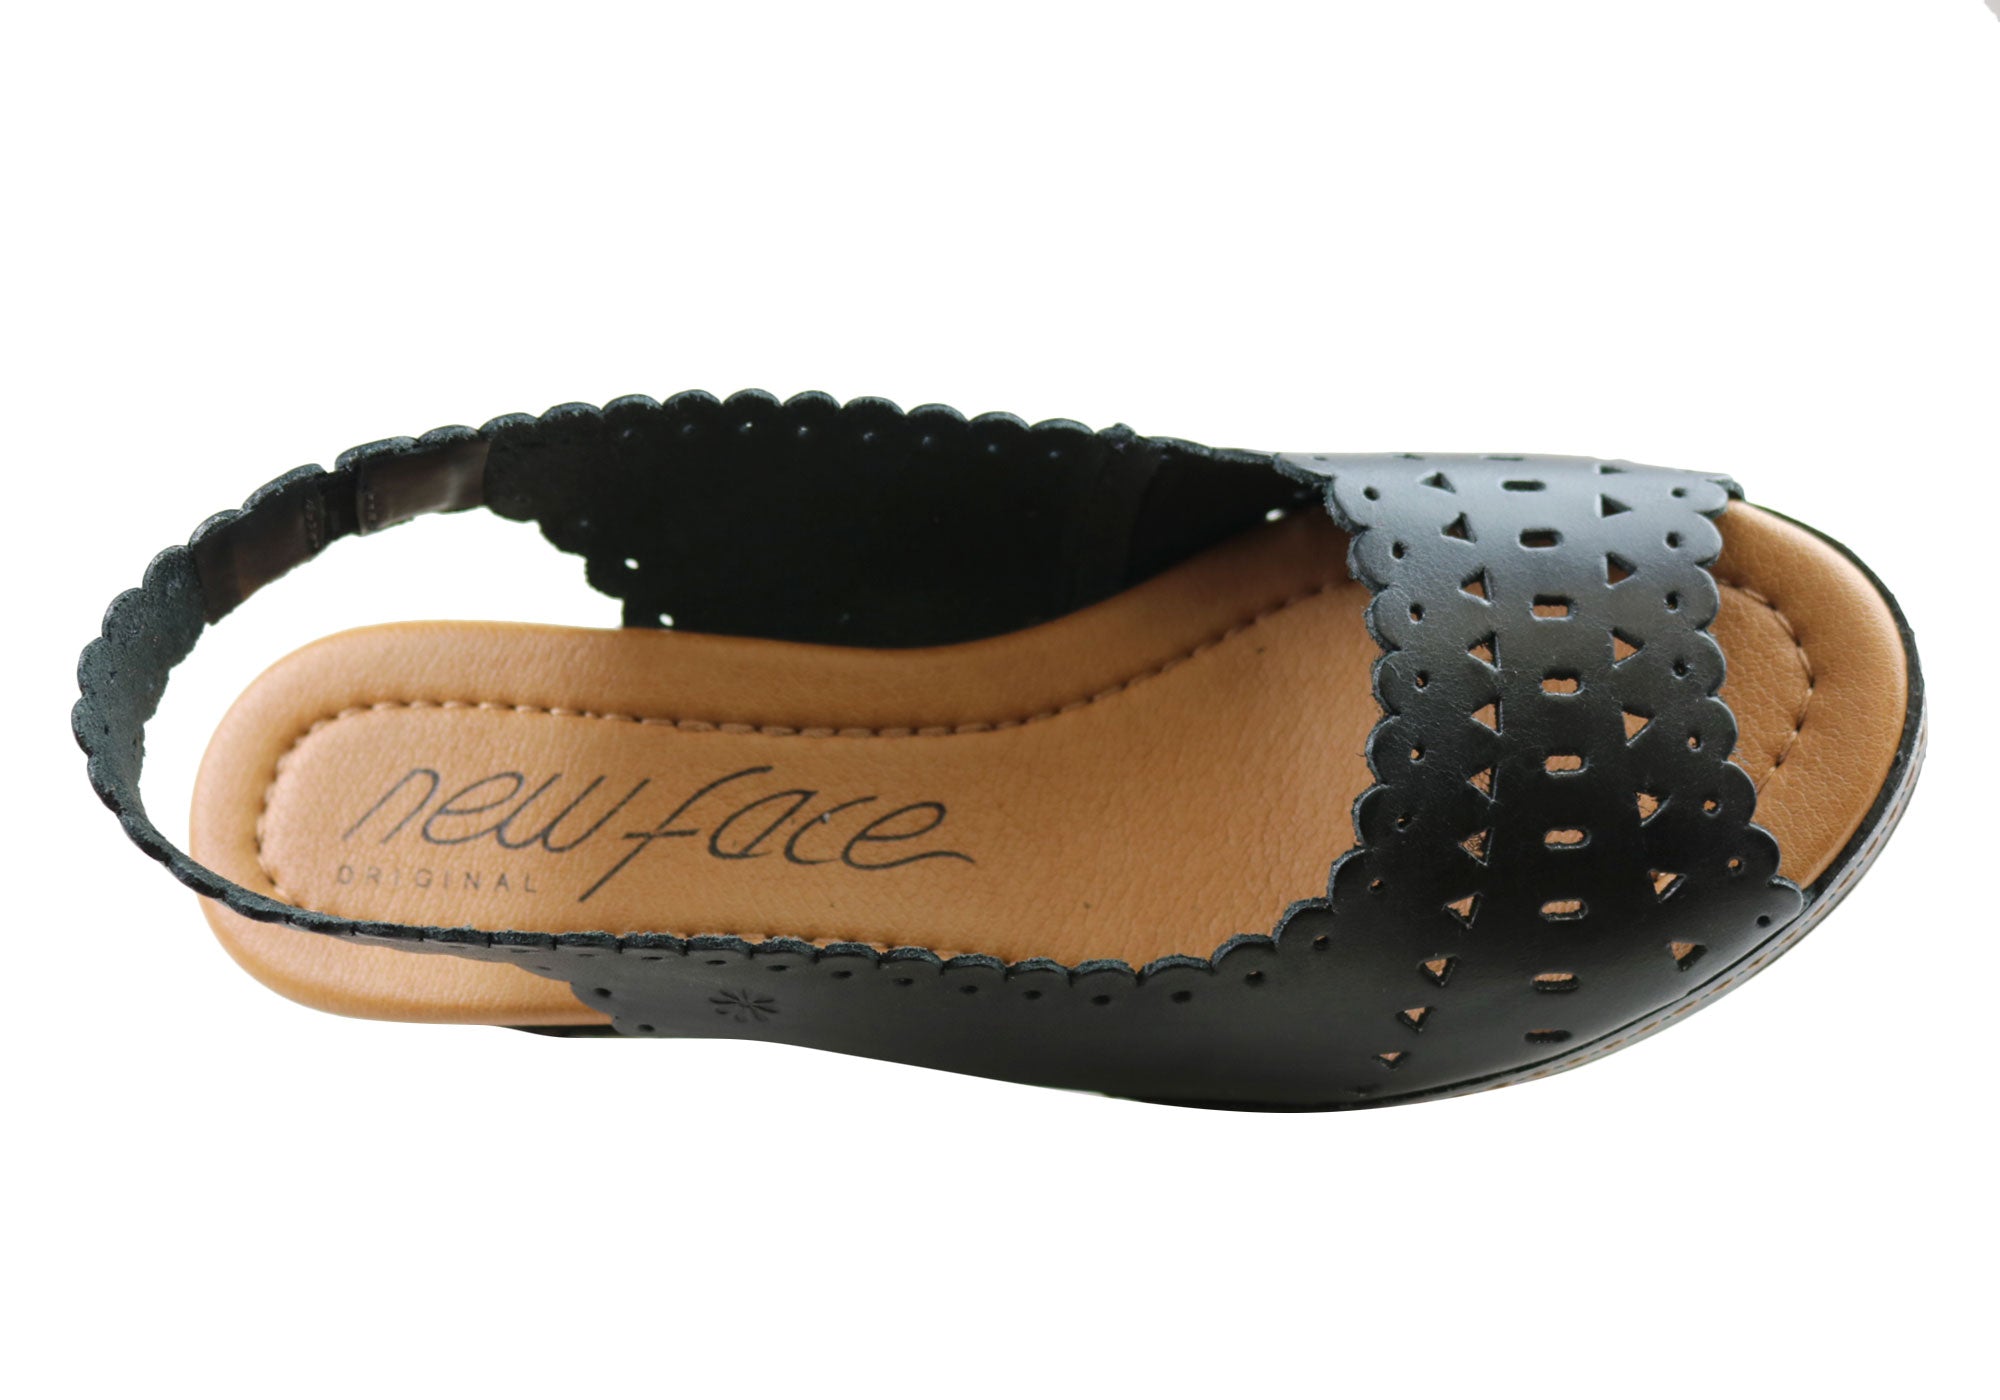 New Face Emberly Womens Leather Wedge Sandals Made In Brazil